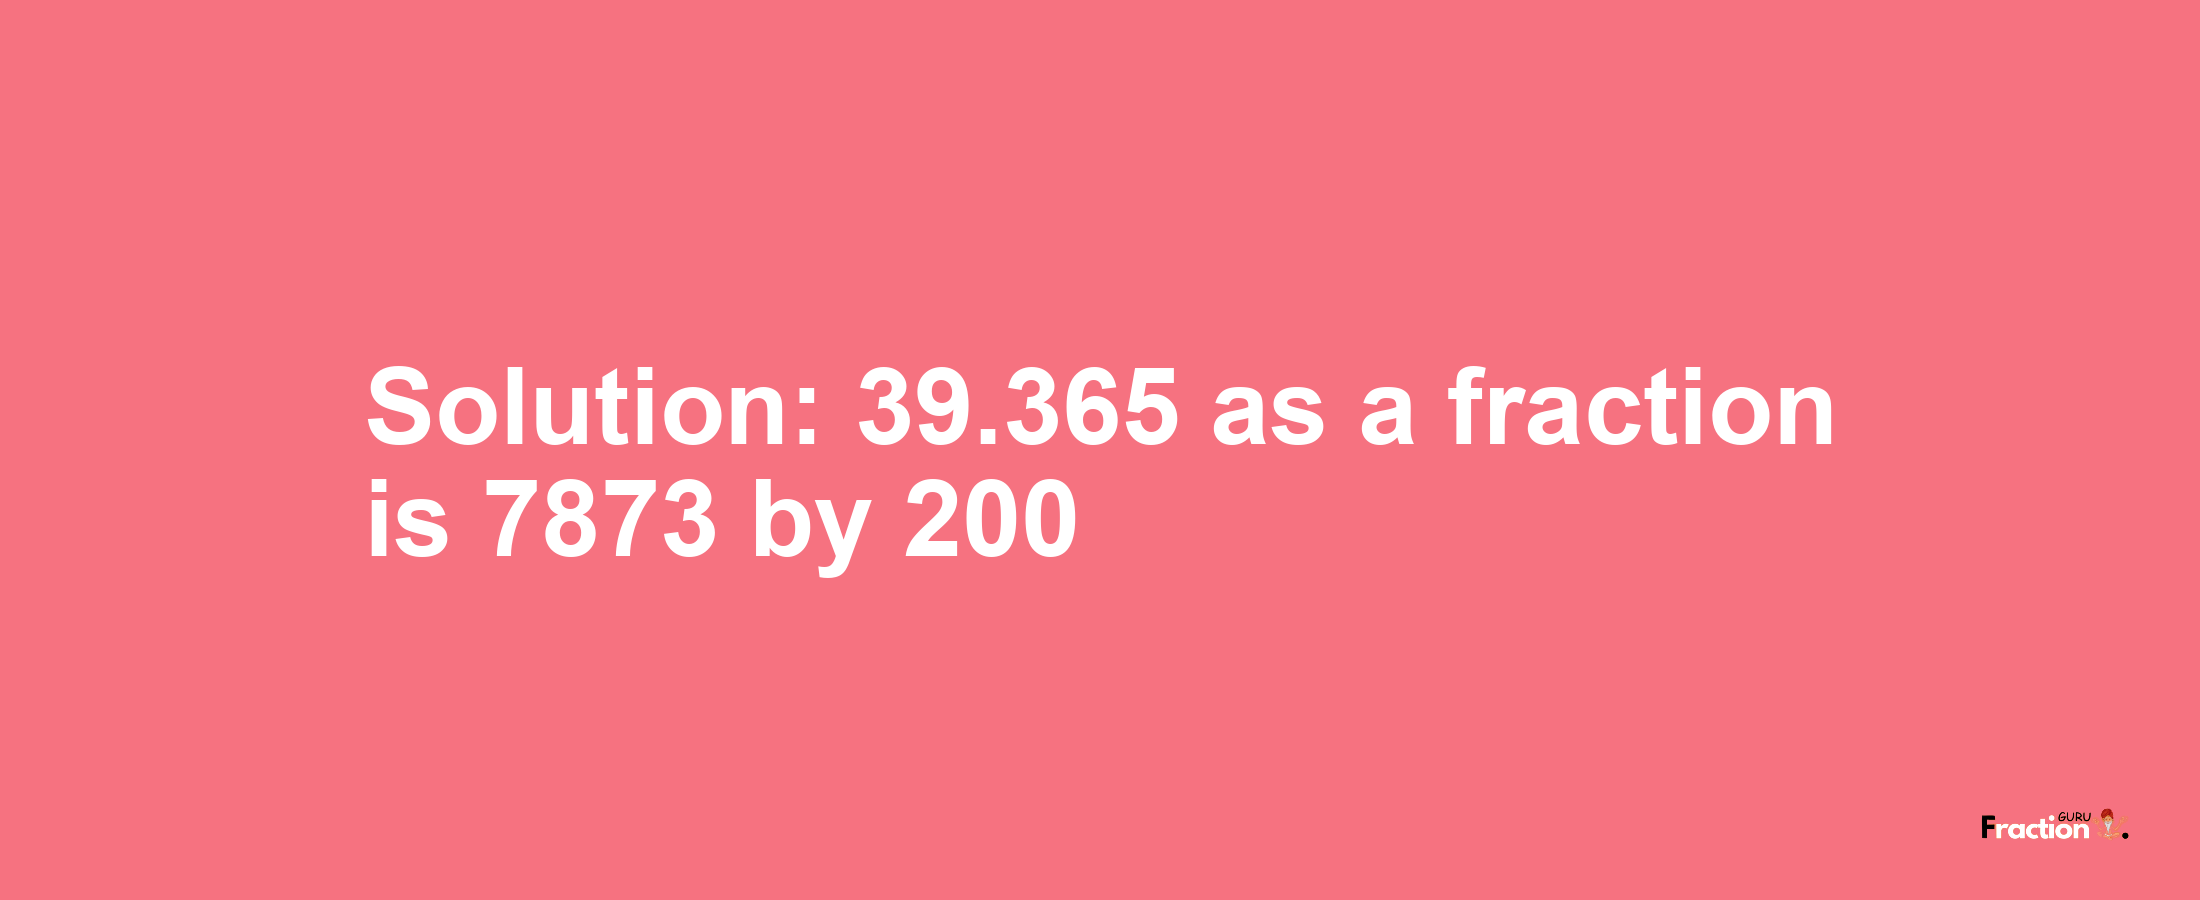 Solution:39.365 as a fraction is 7873/200